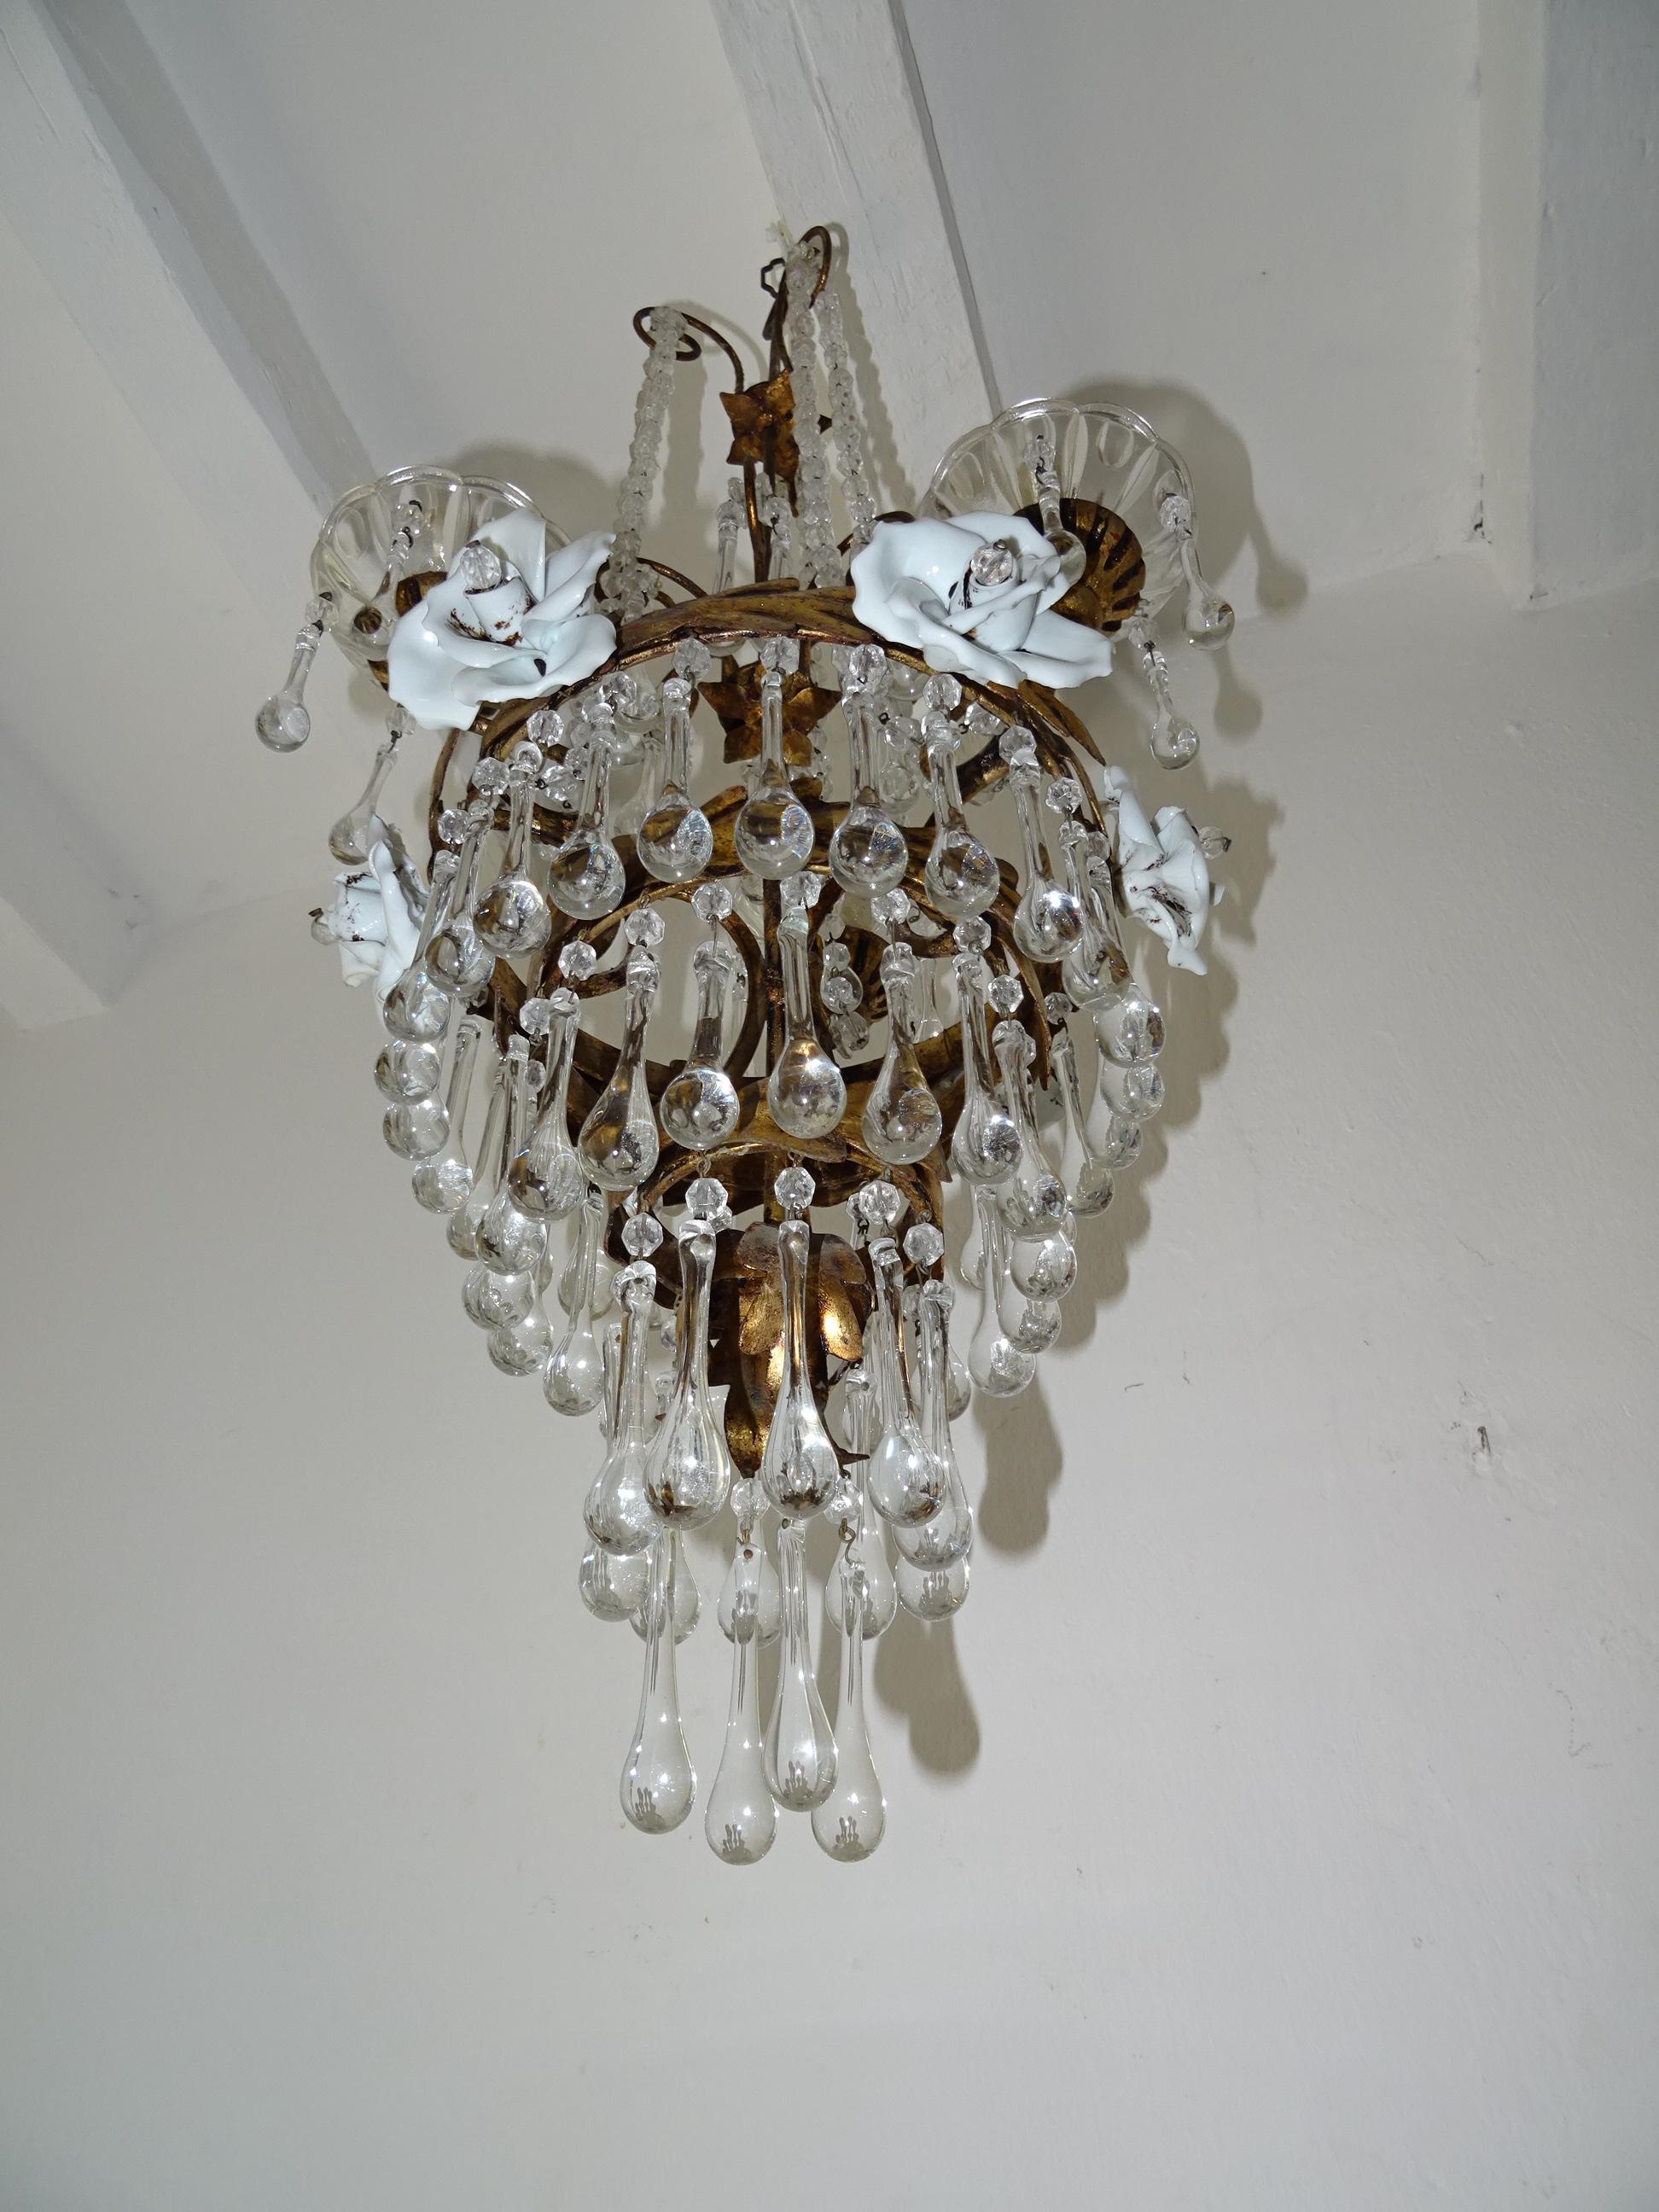 Porcelain Italian Tiered Tole White Roses Murano Drops Chandelier, circa 1930 For Sale